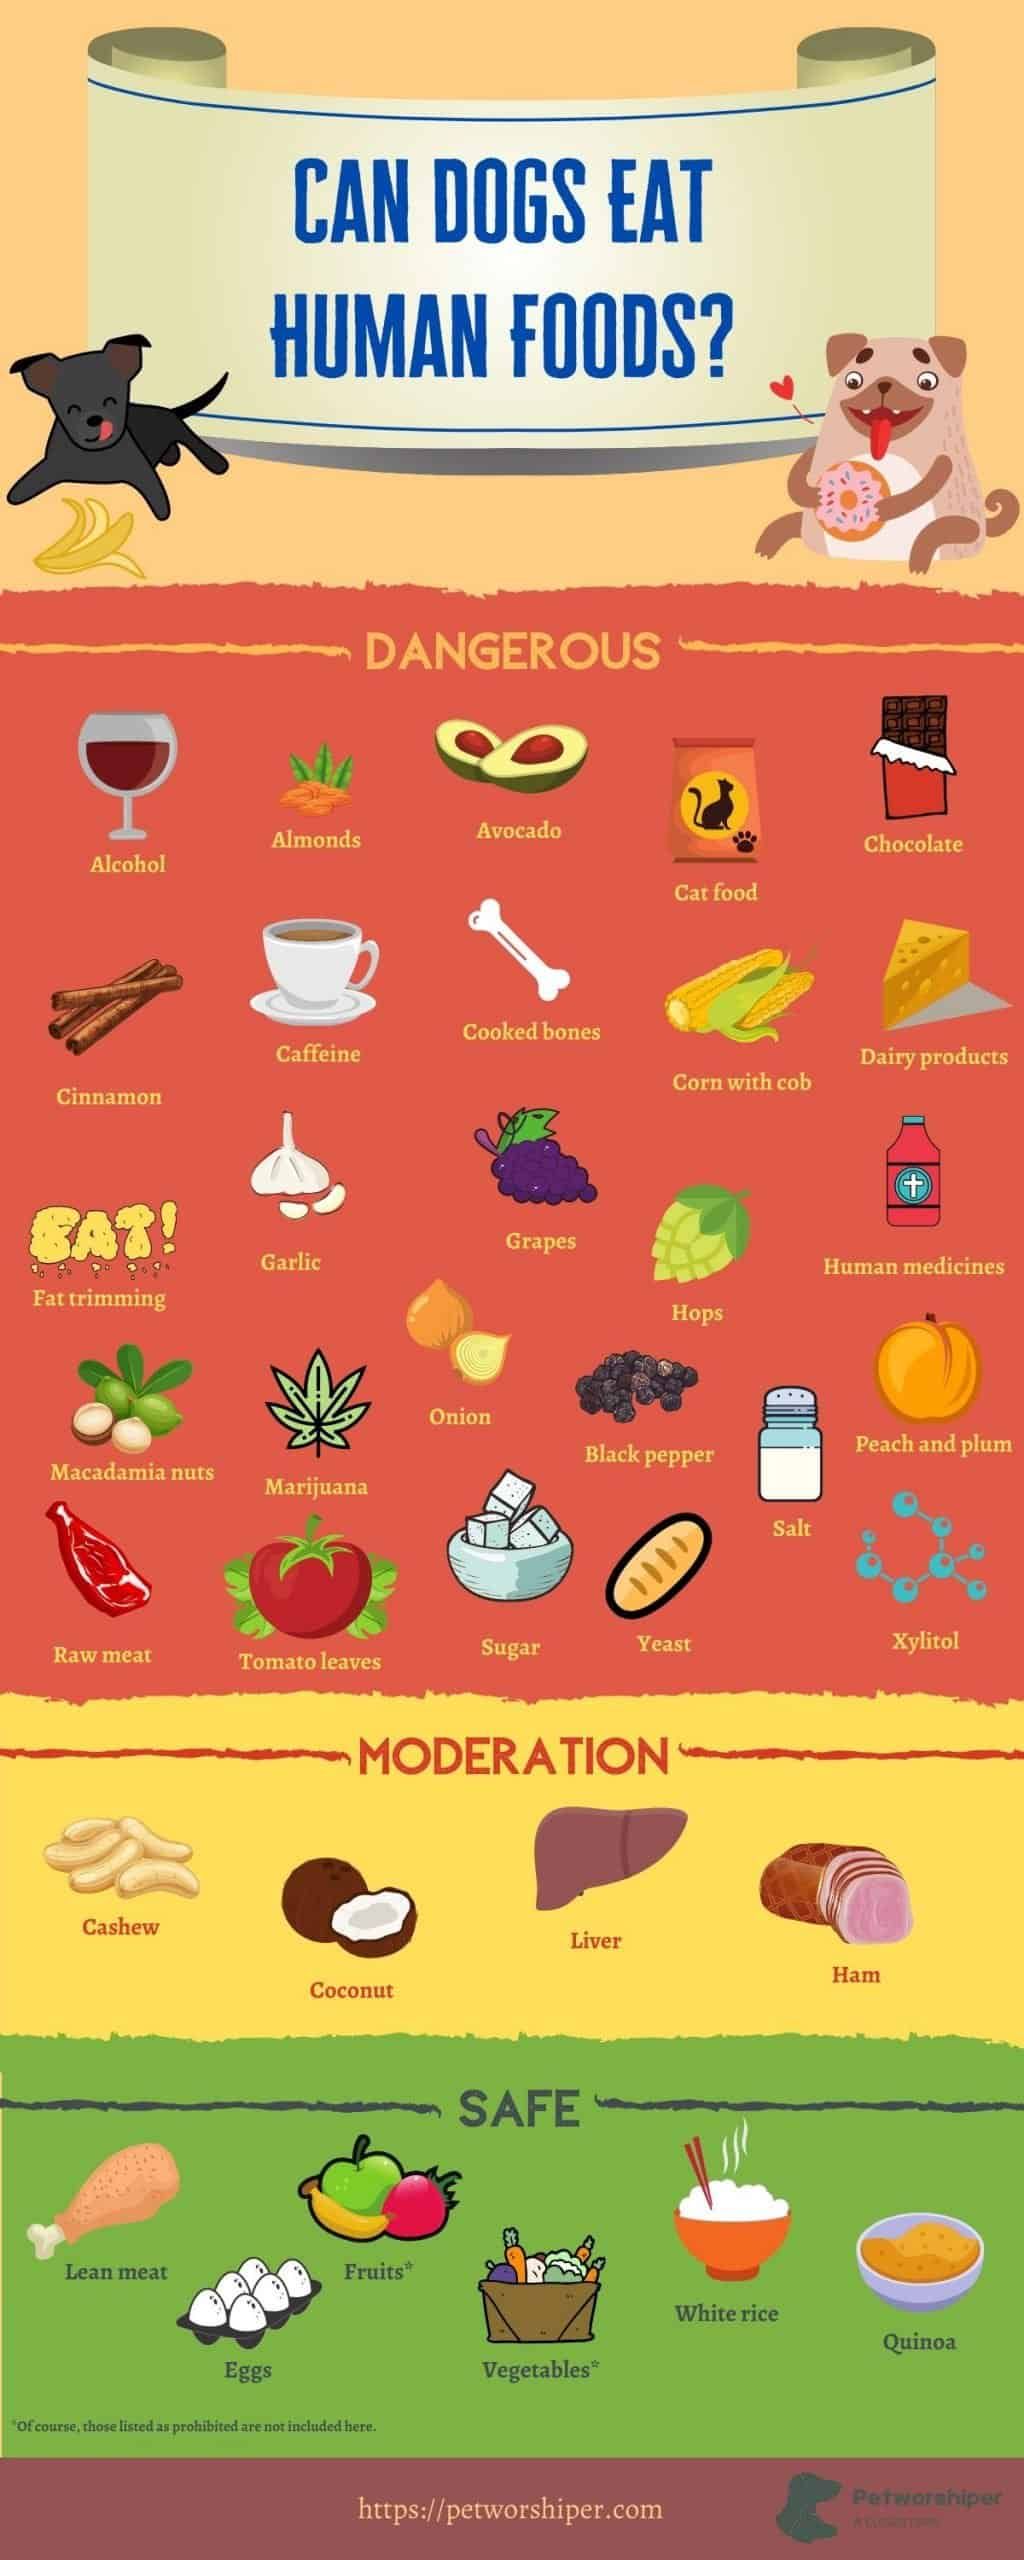 foods dogs can't eat infographic